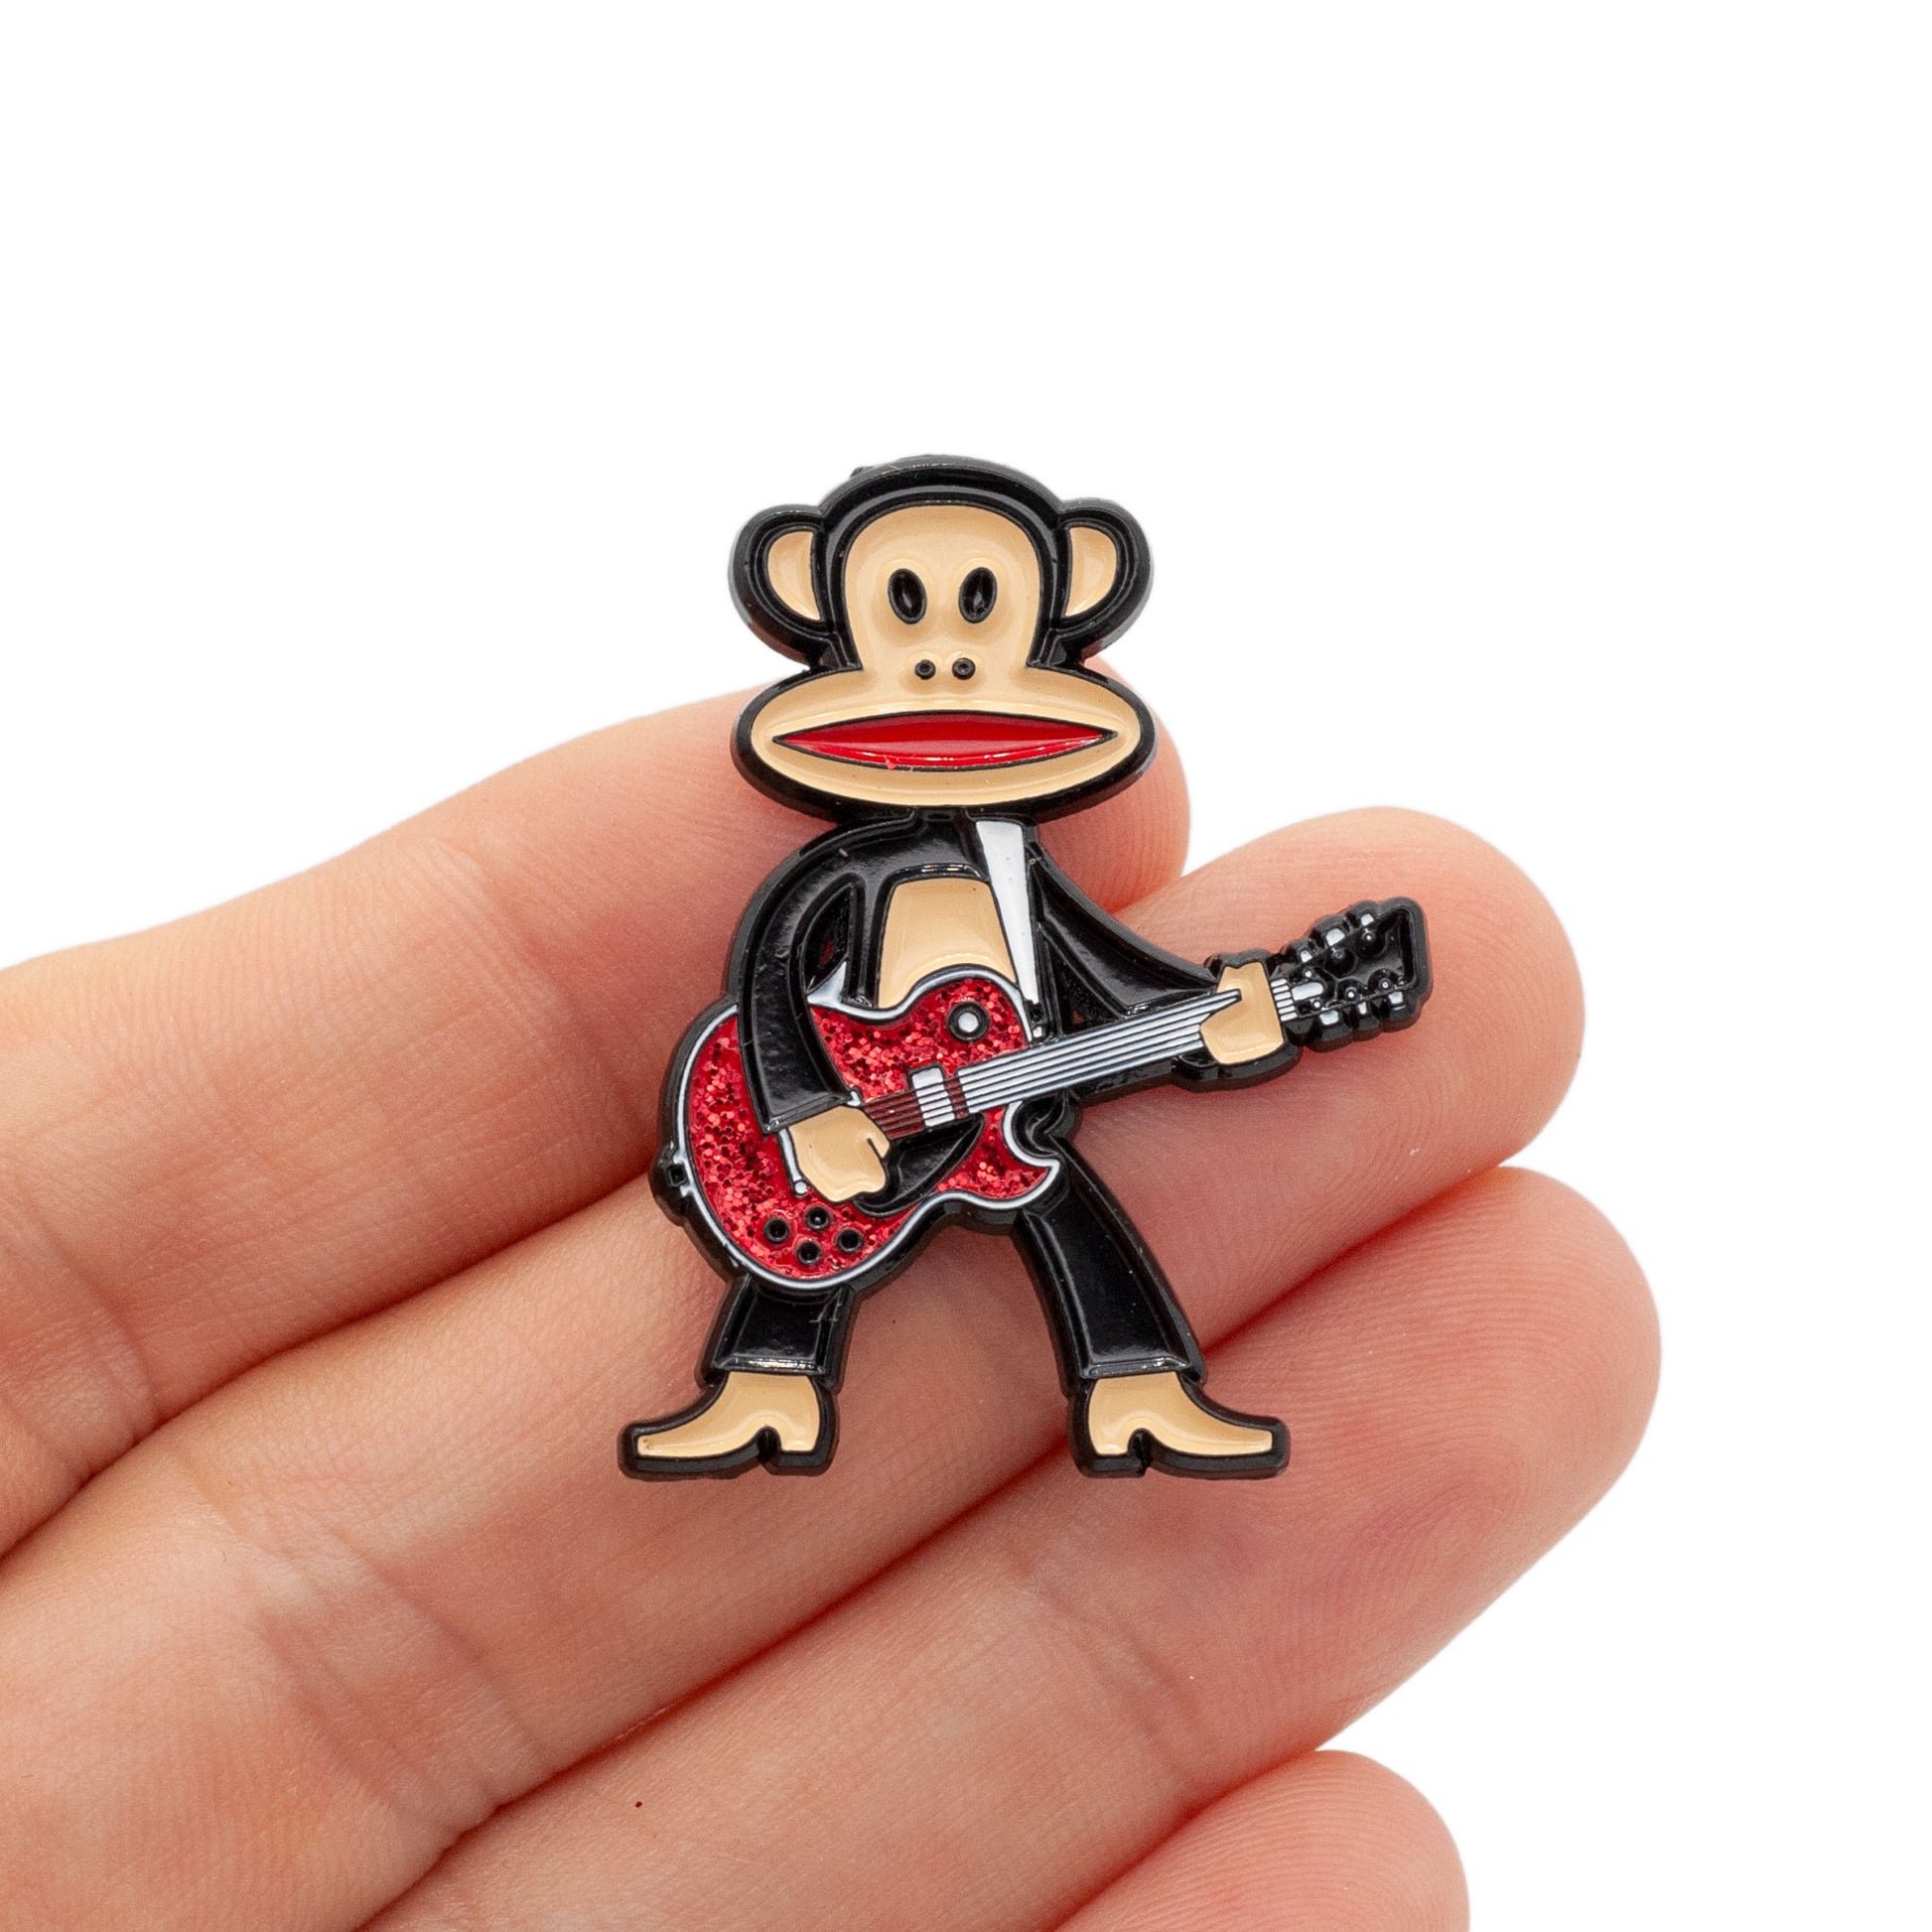 Julius the monkey playing a red glitter guiter, held by a hand against a white background.